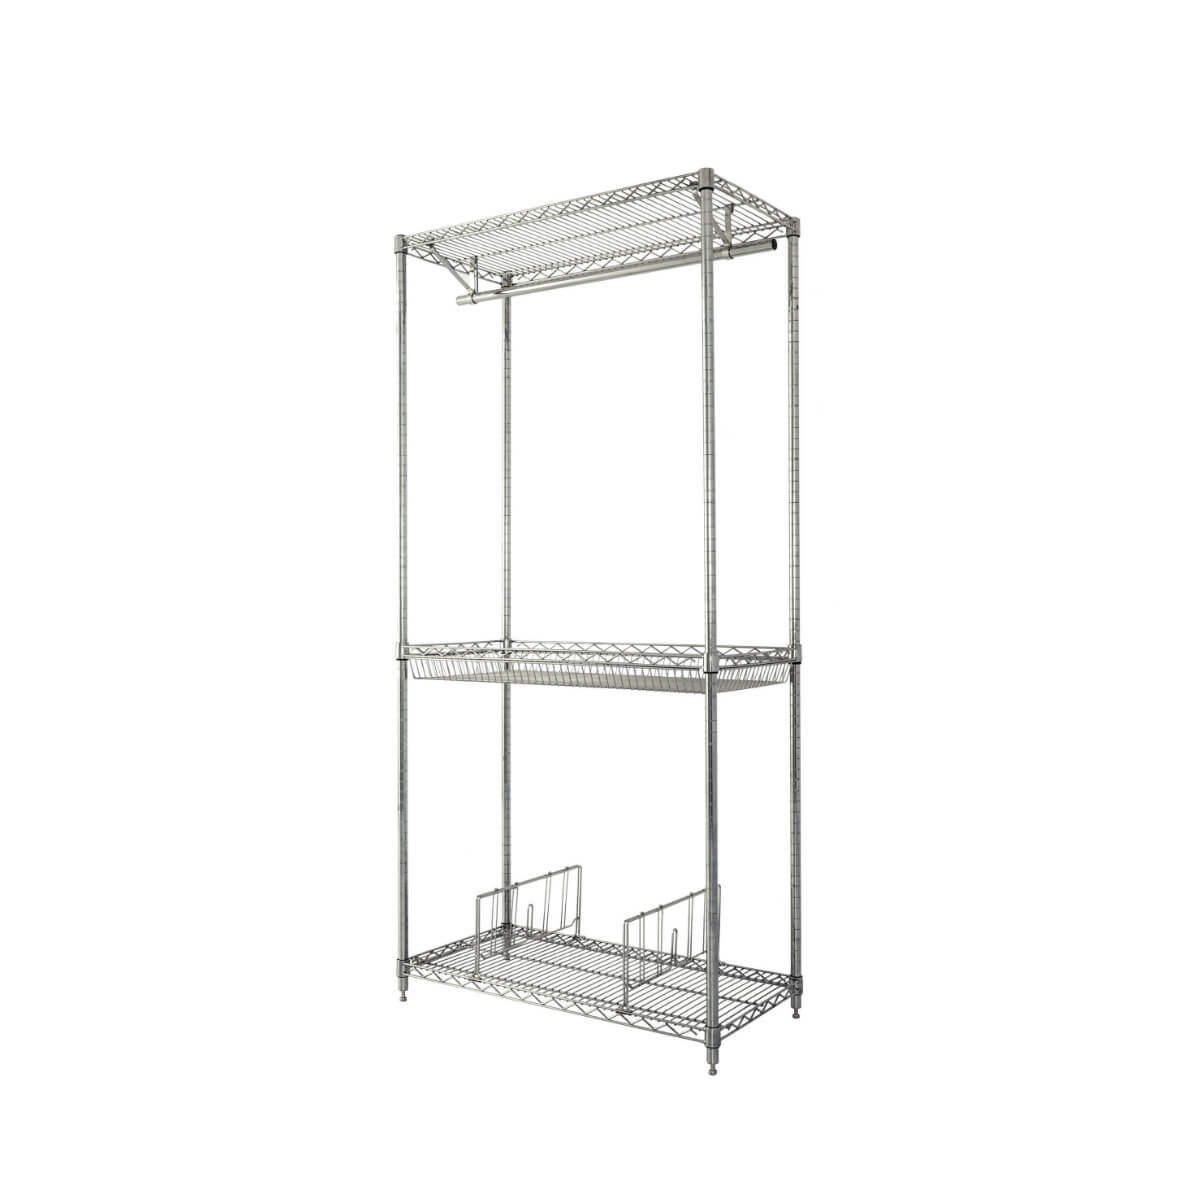 Chrome Wire Shelving Accessories Half, Wire Shelving Accessories